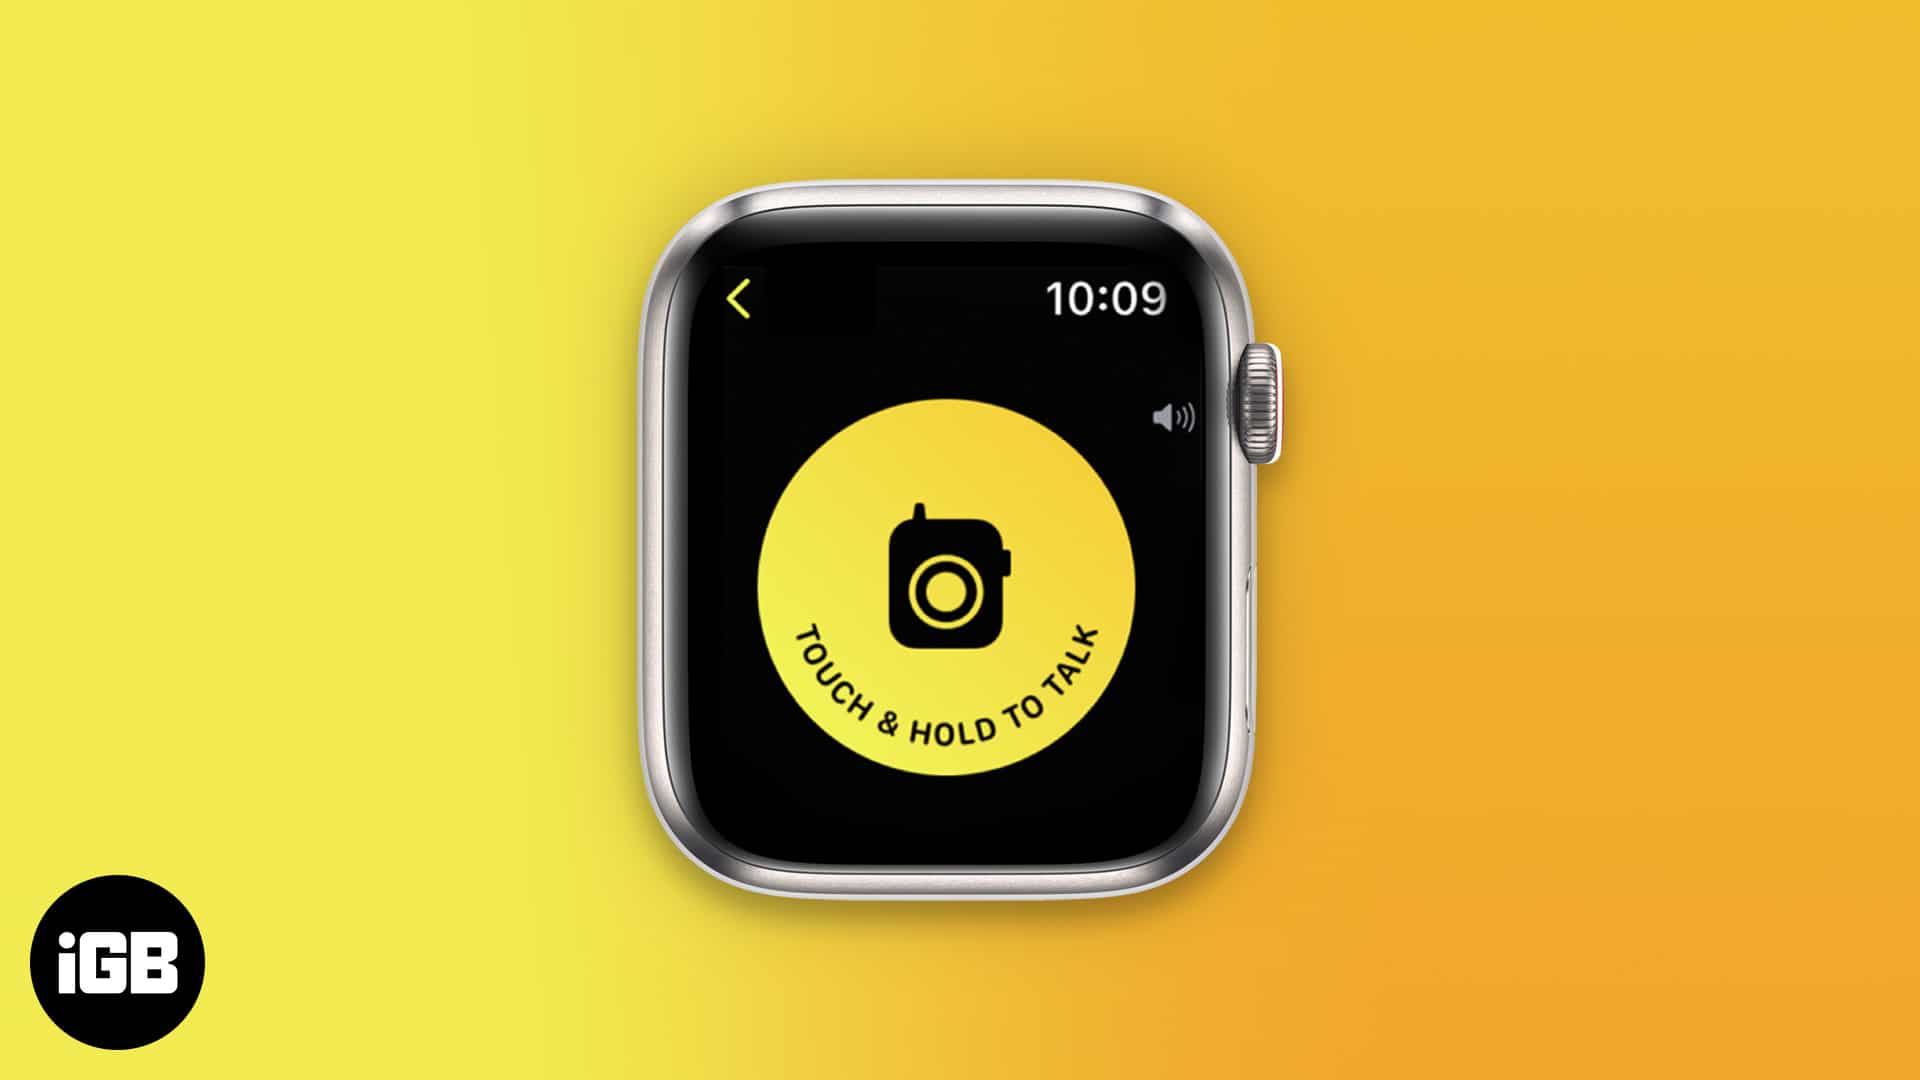 fossil apology taxi How to use Walkie-Talkie on Apple Watch - iGeeksBlog